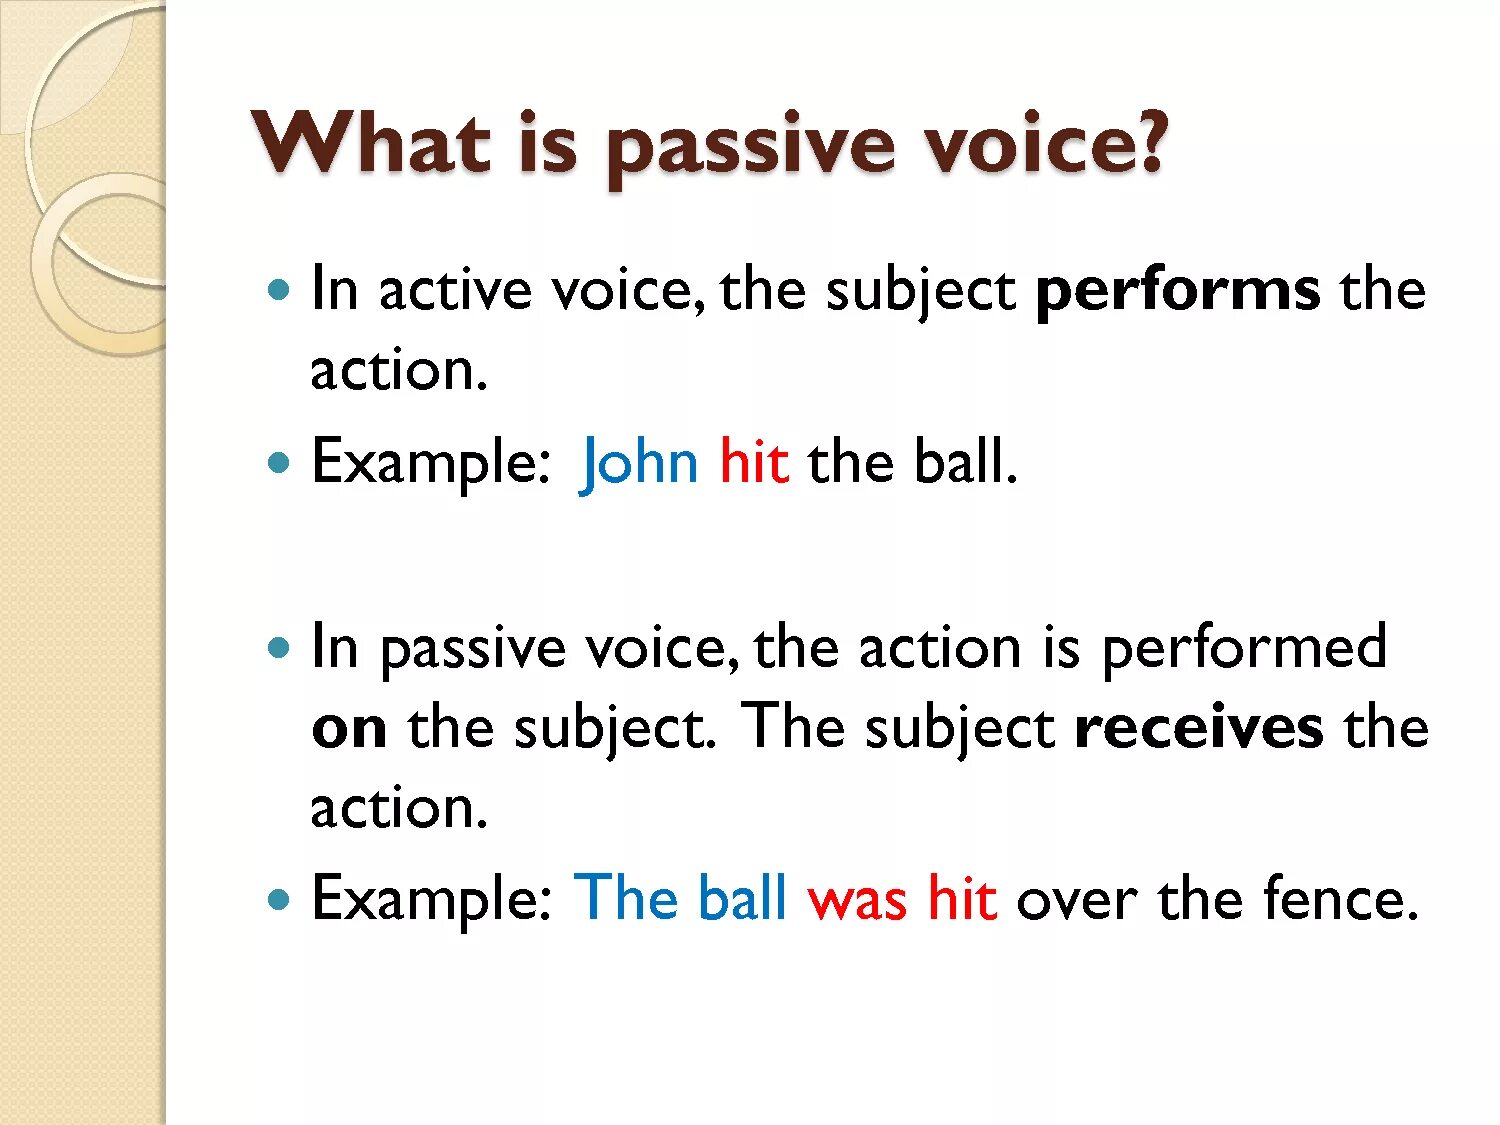 Passive Voice. Active and Passive Voice. What is Passive Voice. Active Voice and Passive Voice.